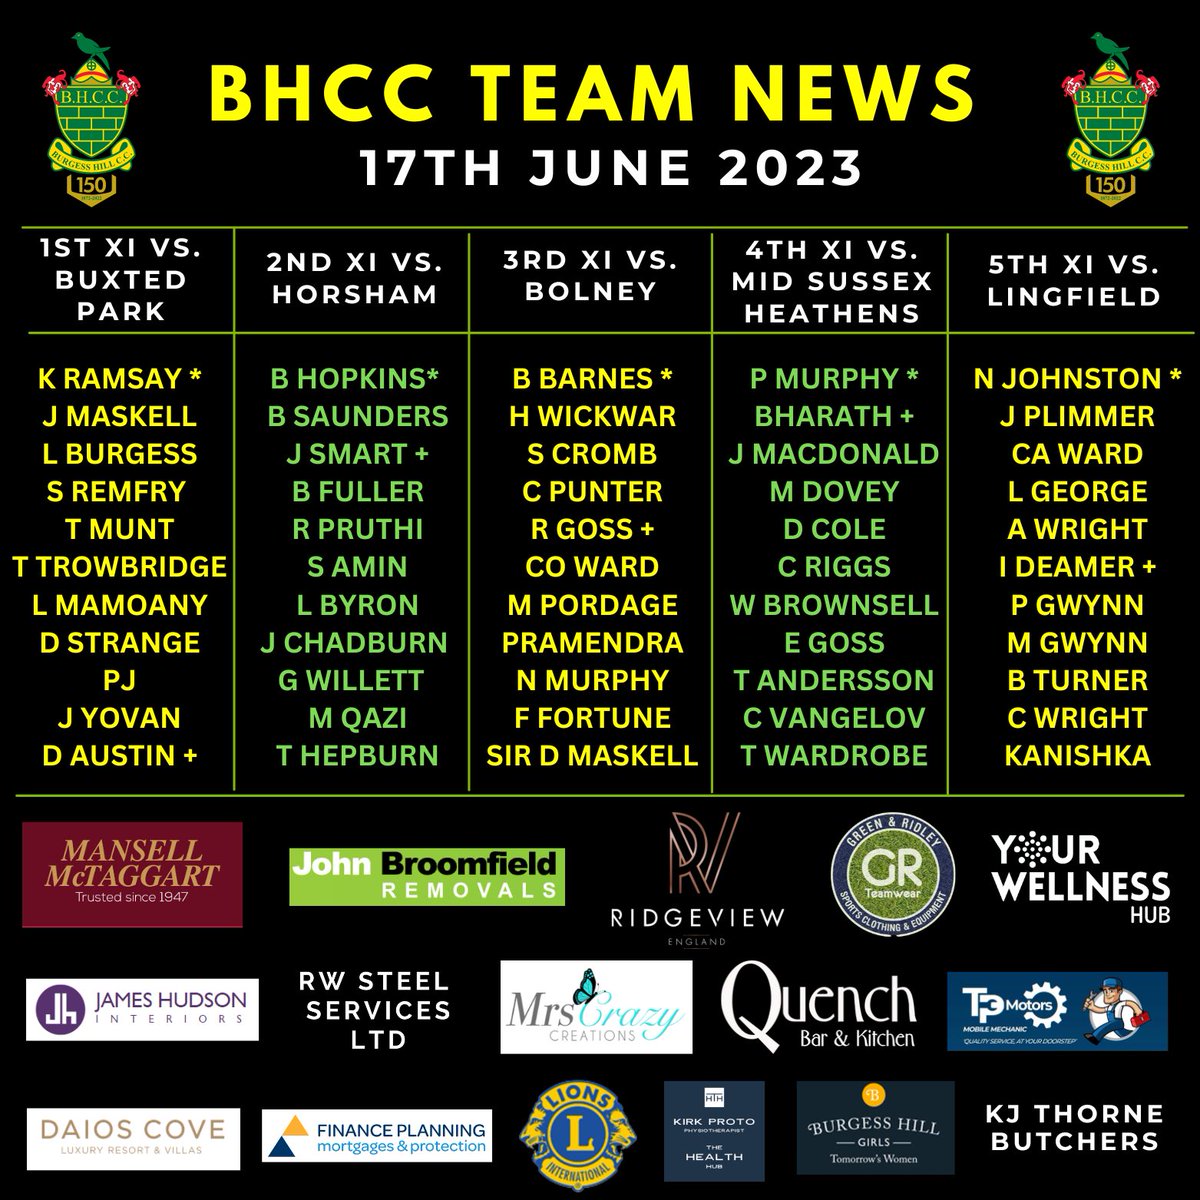 🏏 1s vs Buxted Park
🏏 2s vs Horsham 
🏏 3s vs Bolney
🏏 4s vs MS Heathens
🏏 5s vs Lingfield

5 W&G playing league cricket today with the Gwynn’s, Millie and Paige making debuts. Youth across the teams too. What it’s about!

Good luck all teams, bring back some points 💚💛